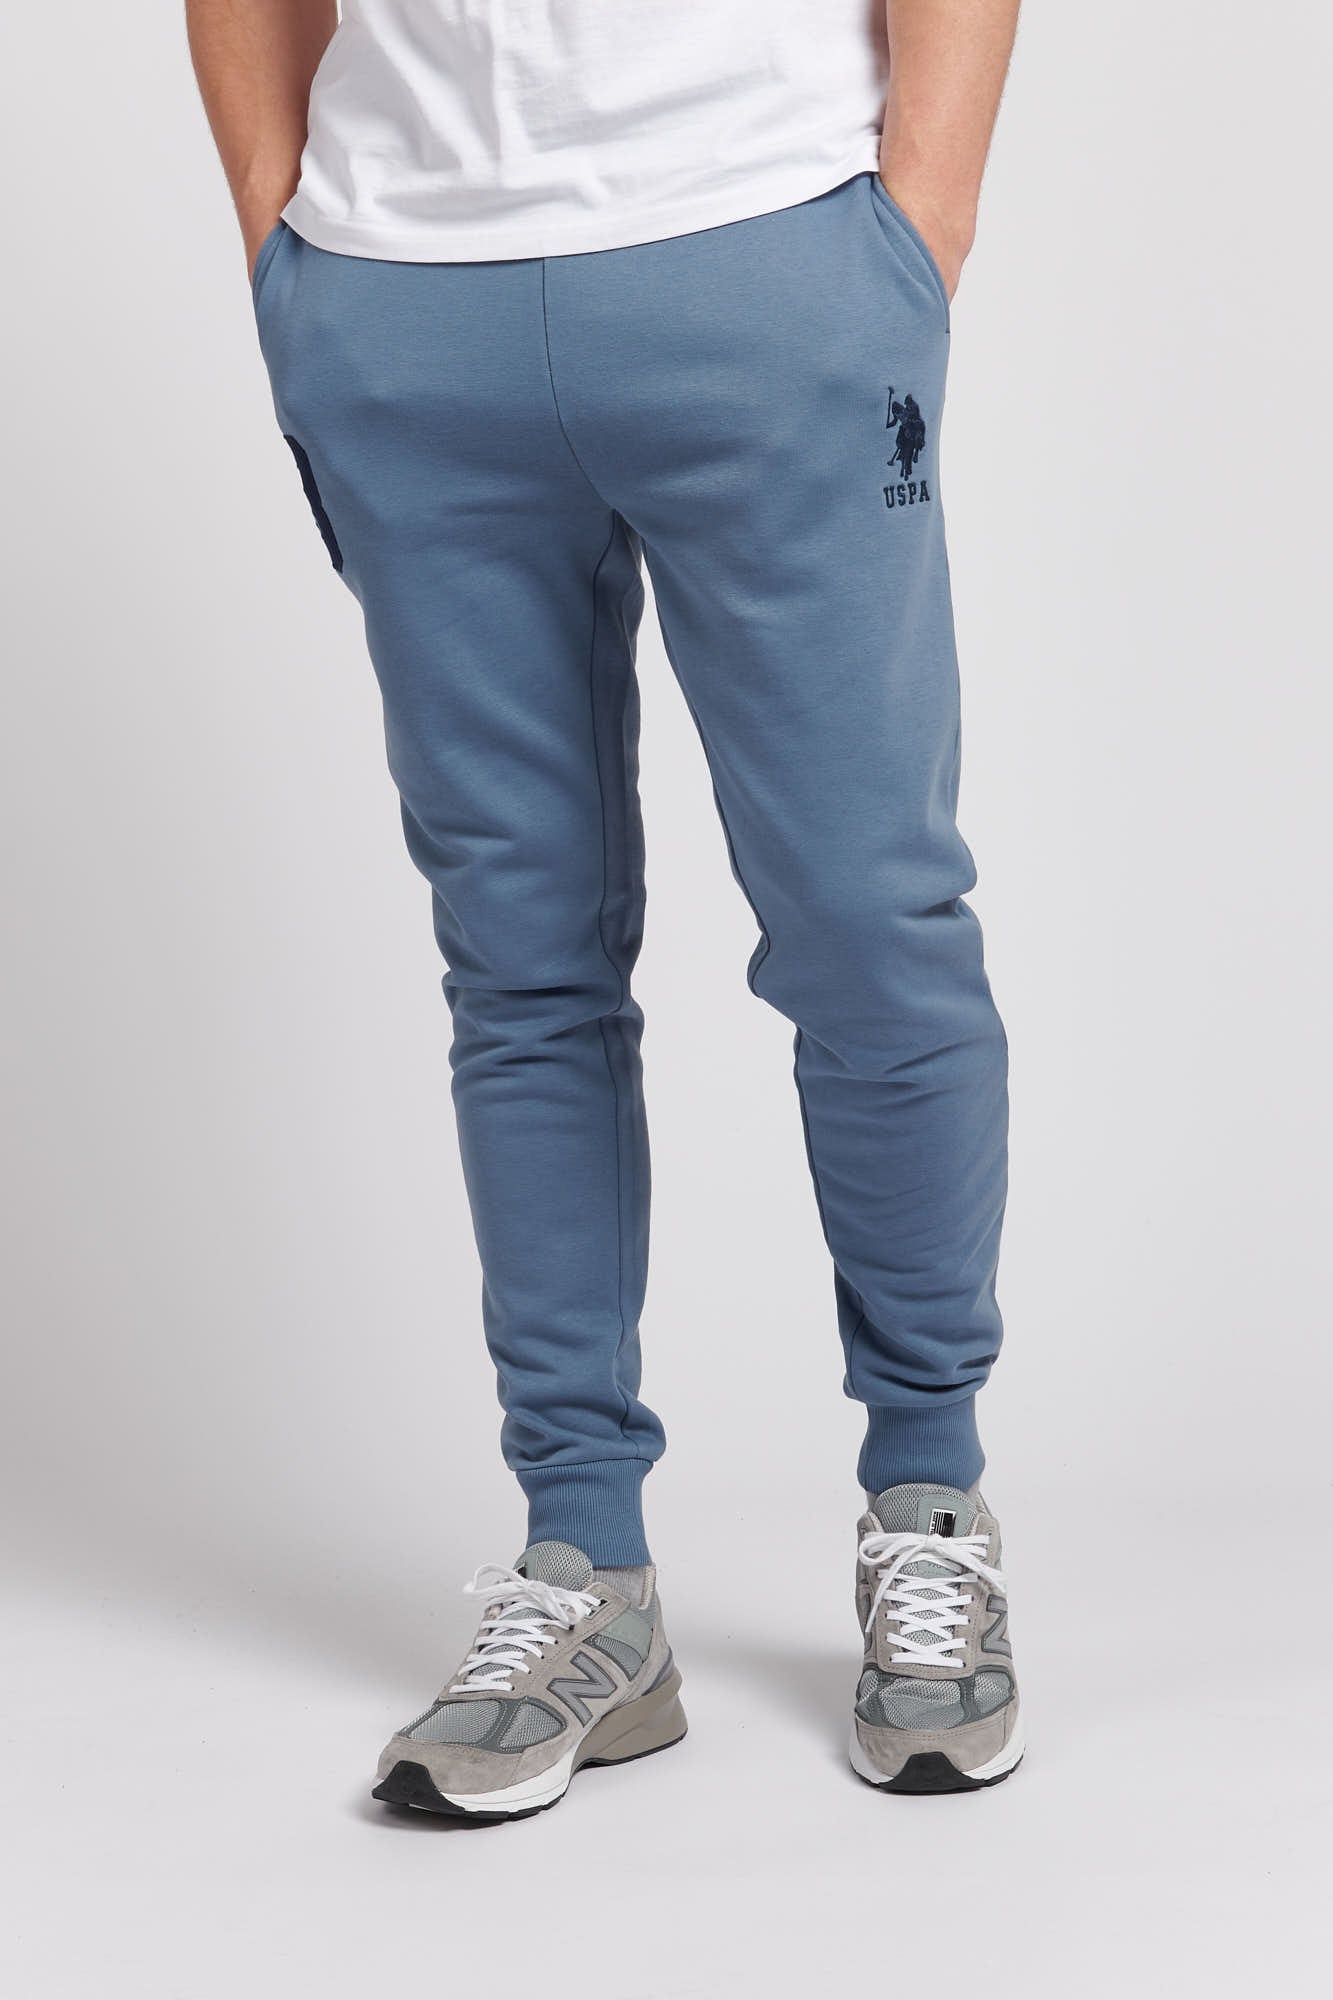 U.S. Polo Assn. Mens Player 3 Joggers in China Blue